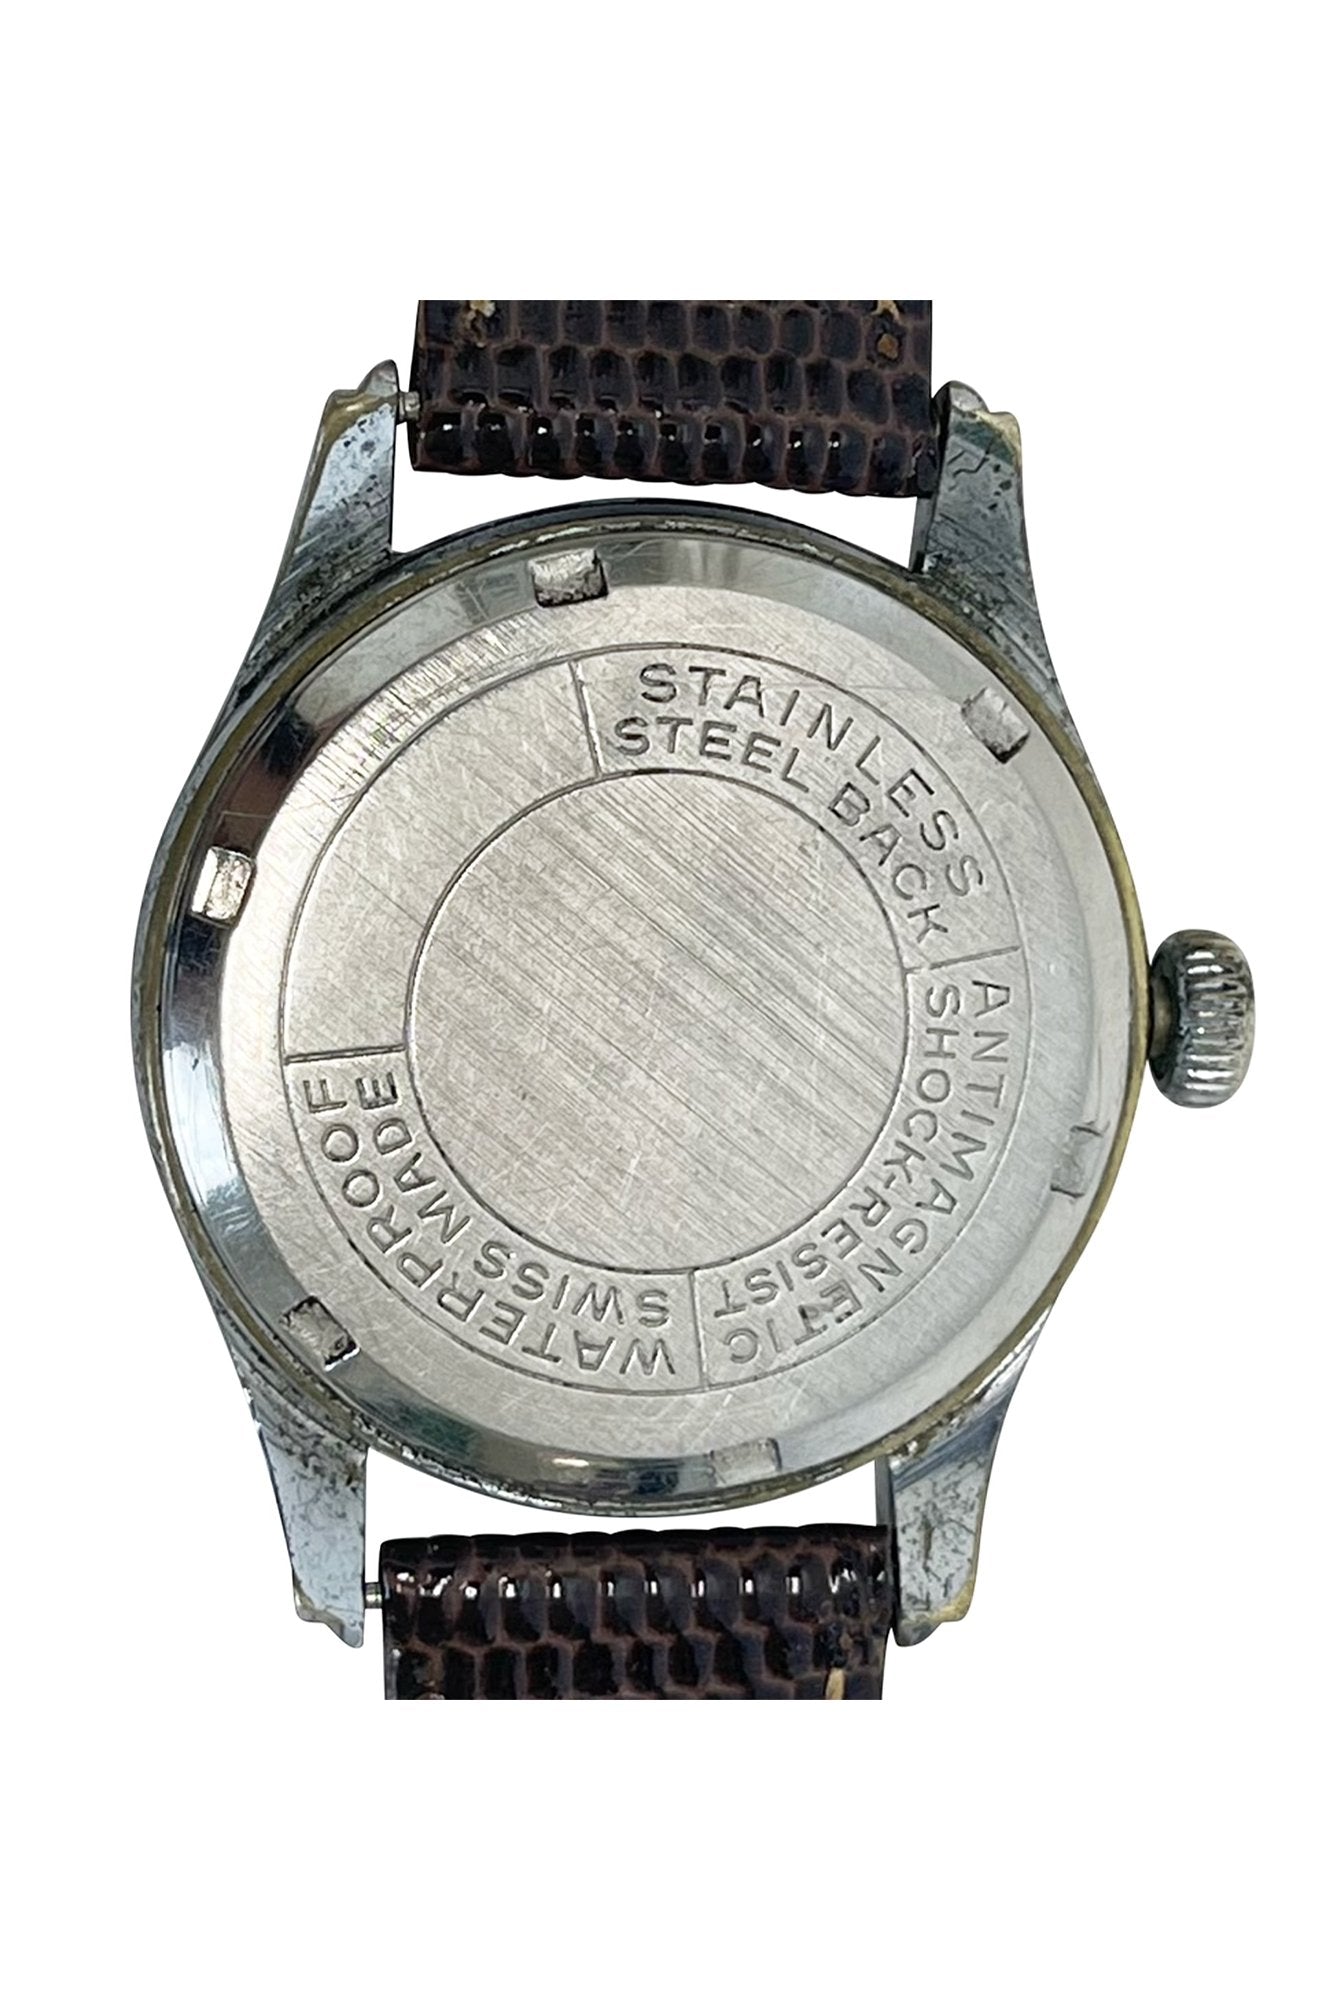 Helios Military - Counting Time Watch Purveyors